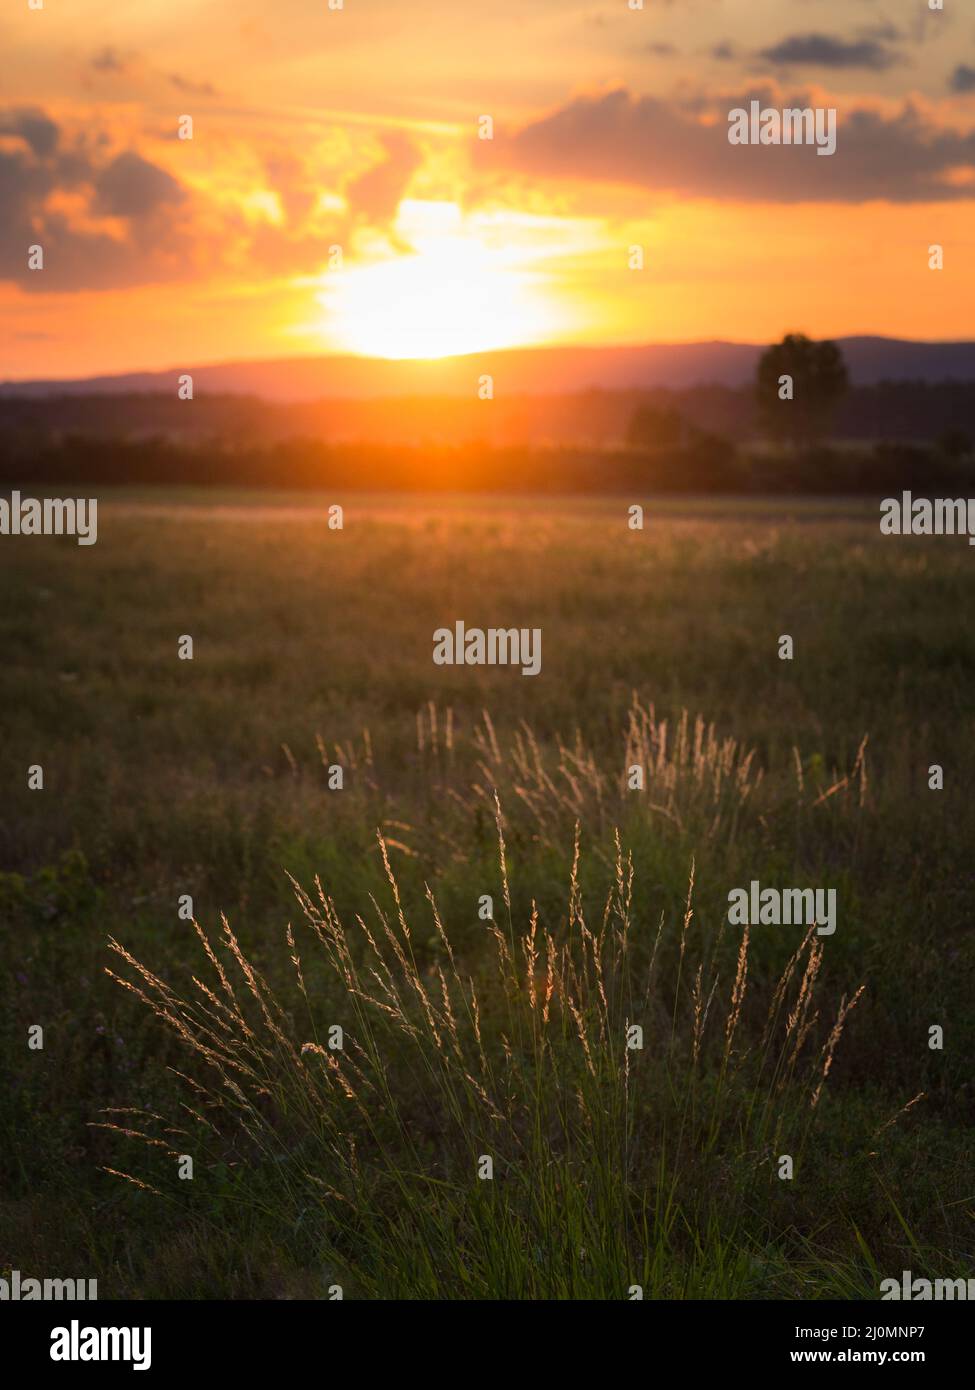 Dried weeds in Backlight. Shallow depth of field. End of Summer Atmosphere. Sunset. Stock Photo